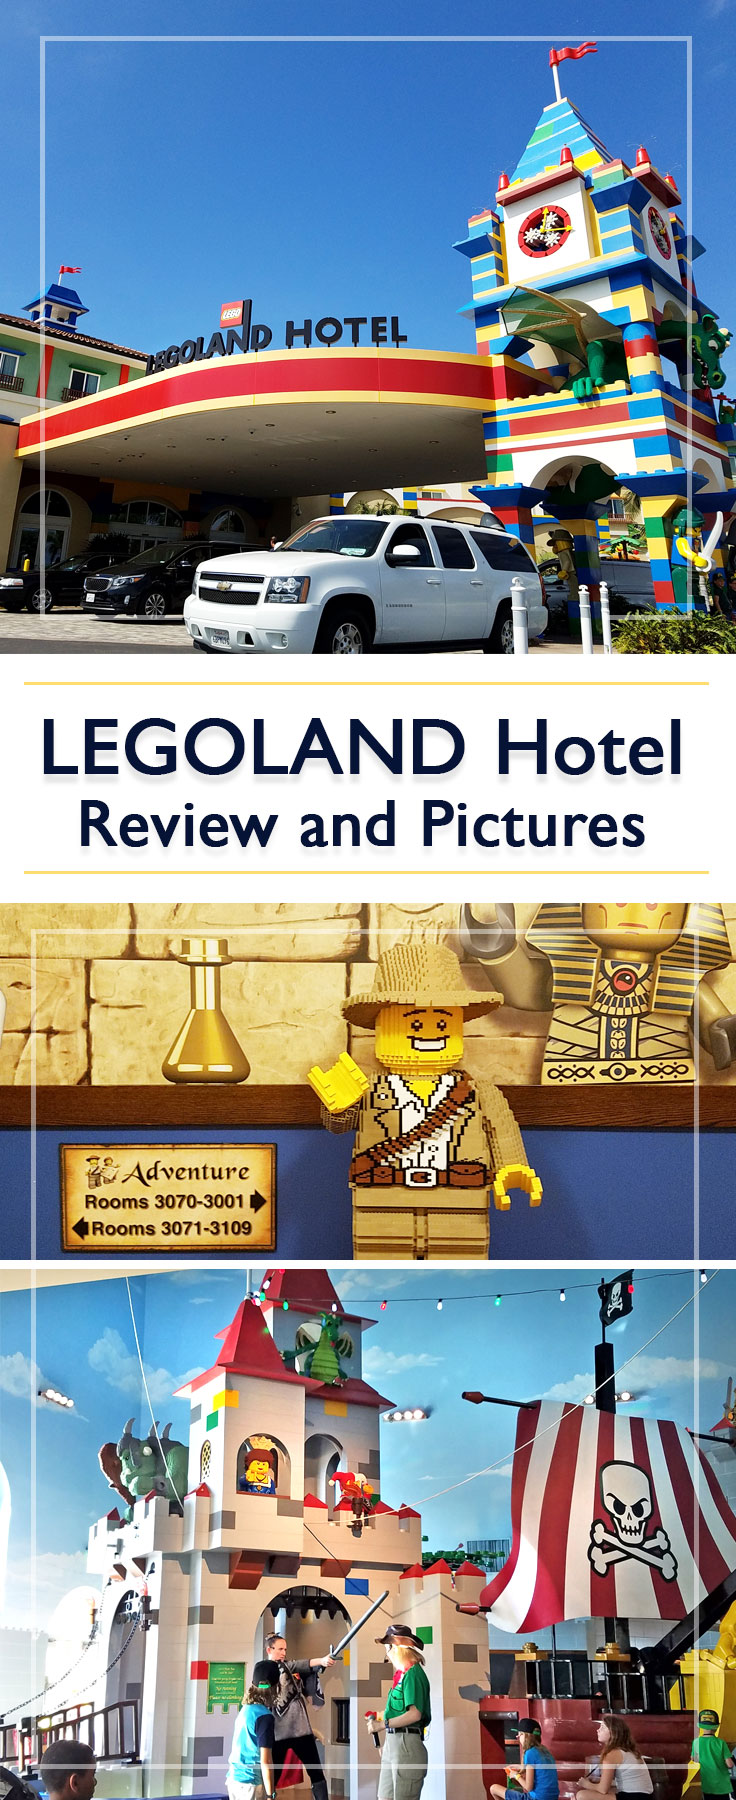 The LEGOLAND Hotel Review and pictures